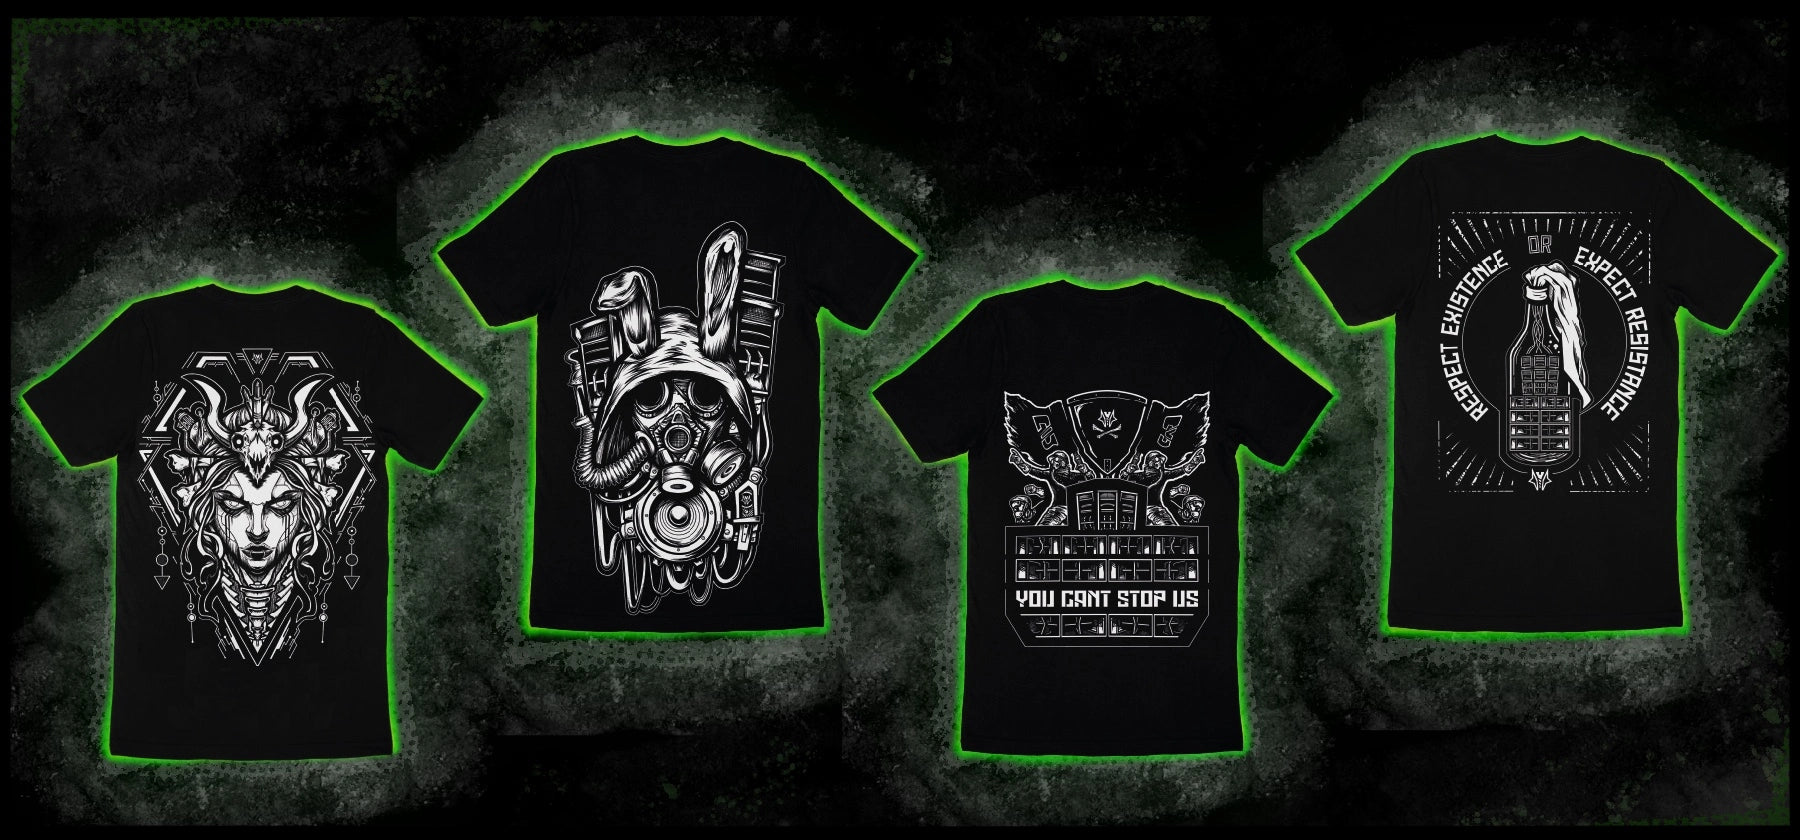 Shows 4 Tekno tshirts with tekno23 typical designs. First is a cyberpunk witch t shirt related to a czechtekno freeparty. second is a steampunk freetekno bunny with a speaker and soundsytsem arround. last 2 show teknival typical soundsystems designs